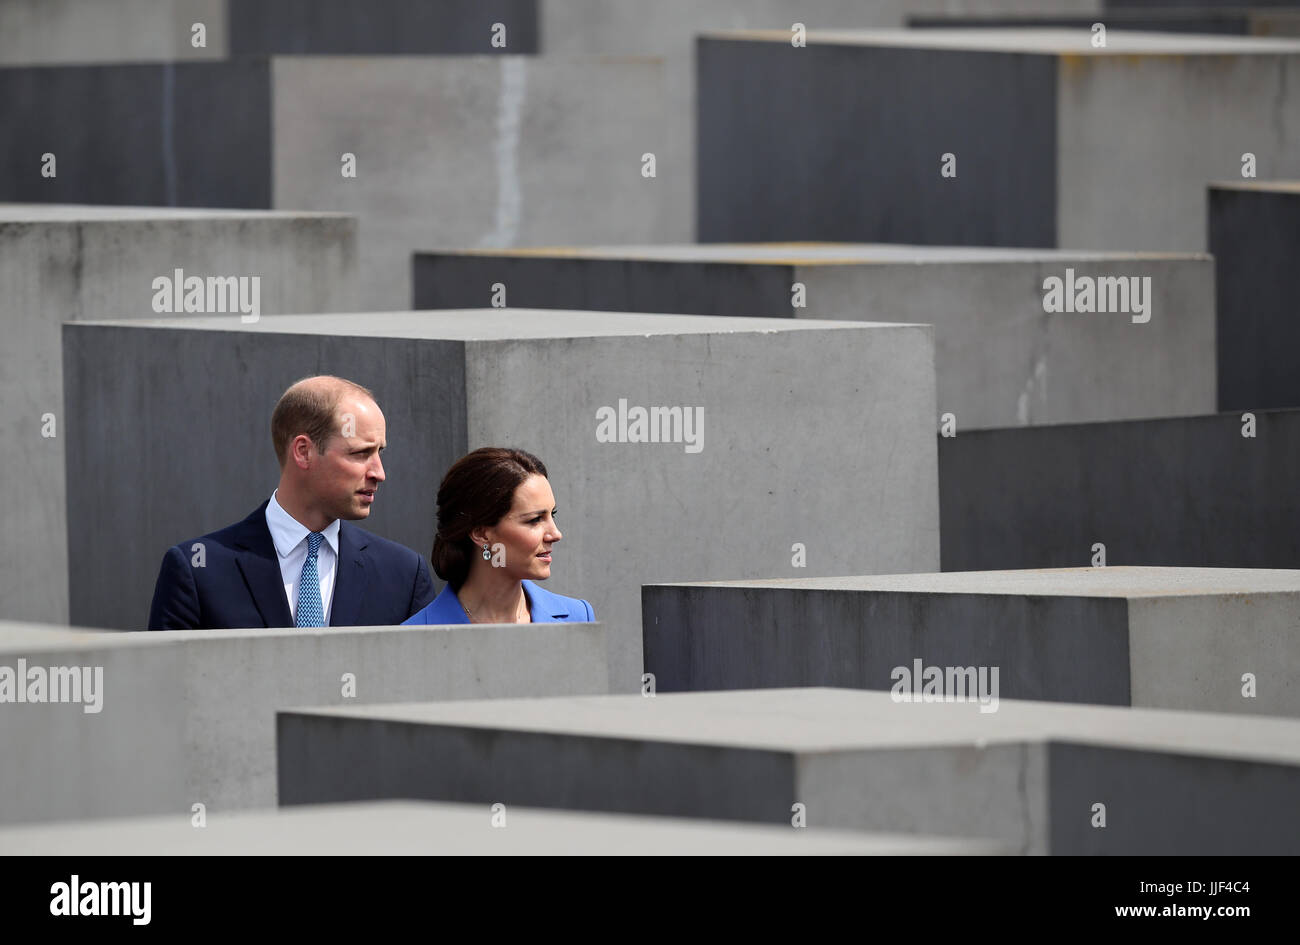 The Duke and Duchess of Cambridge during a visit to the Holocaust Memorial in Berlin on the first day of their three-day tour of Germany. Stock Photo